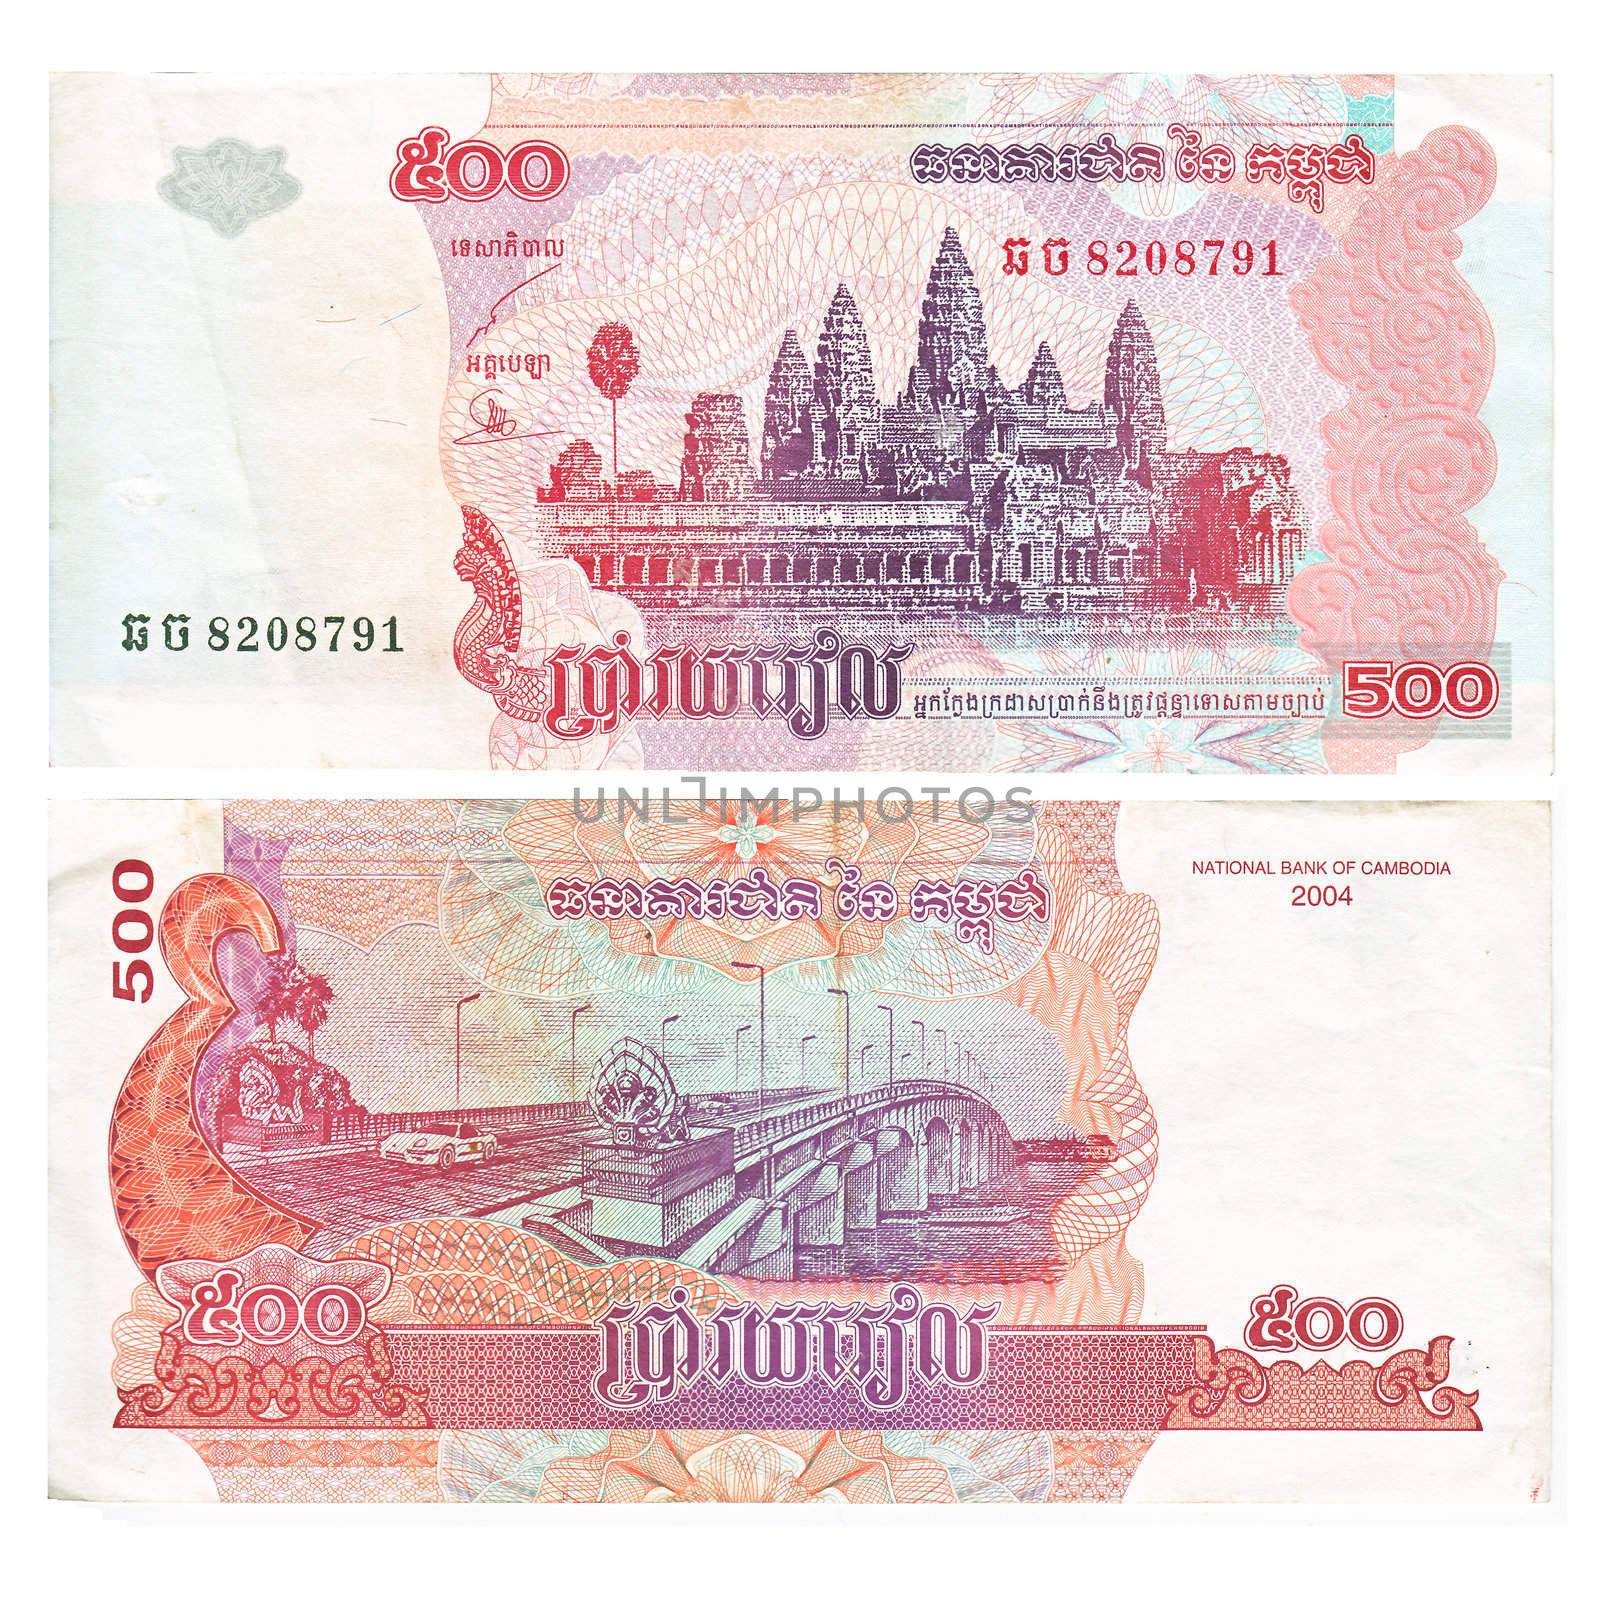 500 riel bill of Cambodia, both sides over white background